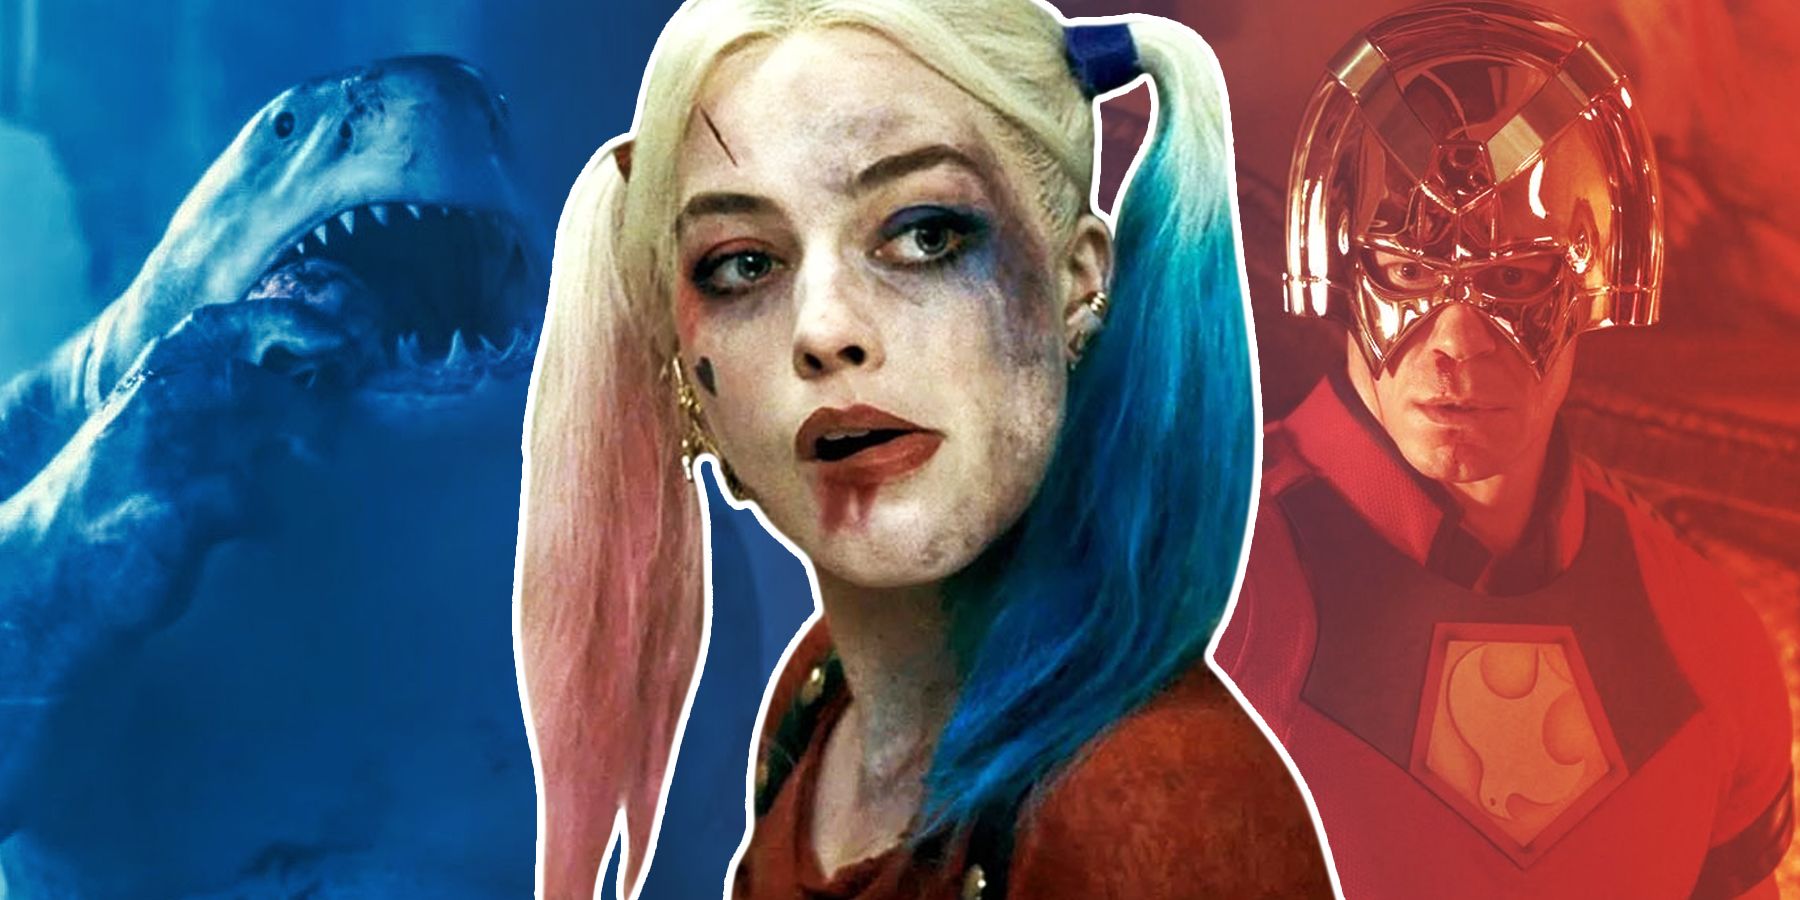 King Shark, Harley Quinn and Peacemaker from 2021's Suicide Squad